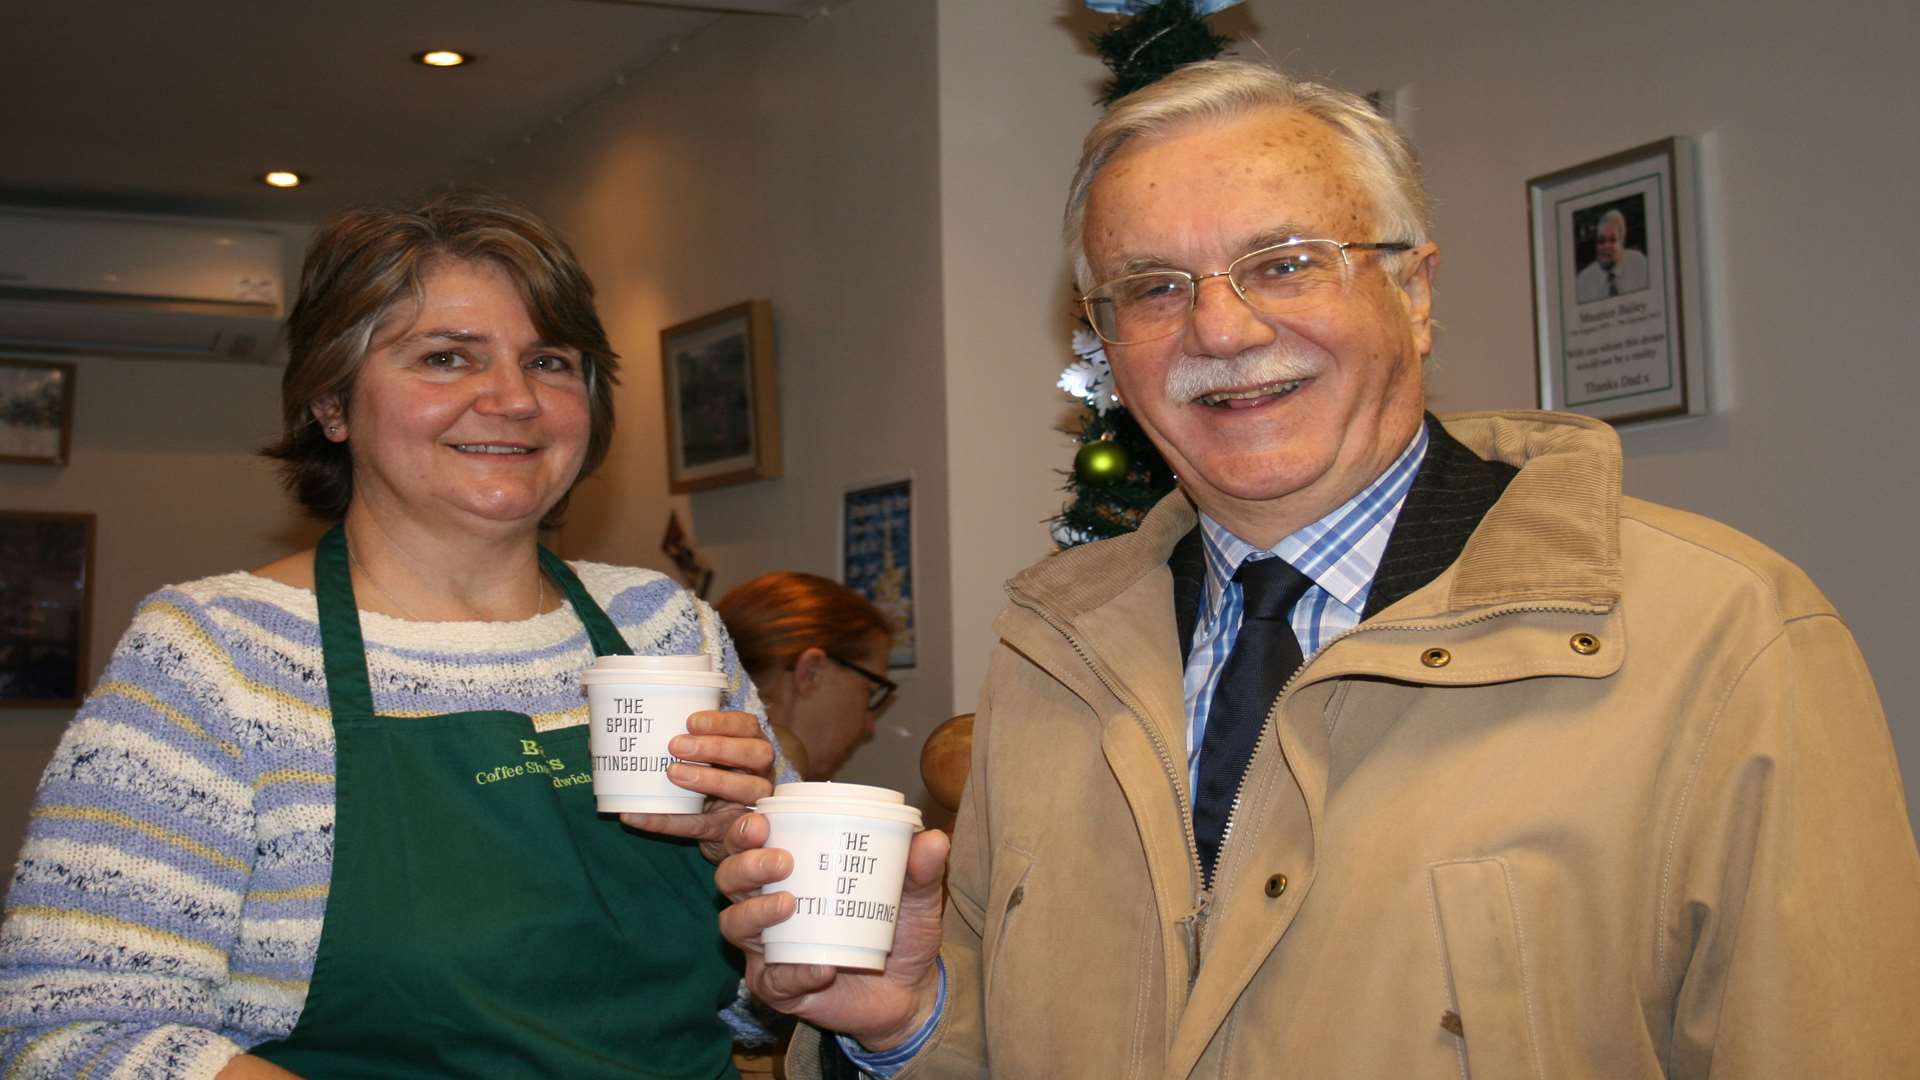 Cllr Mike Cosgrove with Baileys coffee shop manager Sally Reeve, based in Sittingbourne High Street, supporting Small Business Saturday